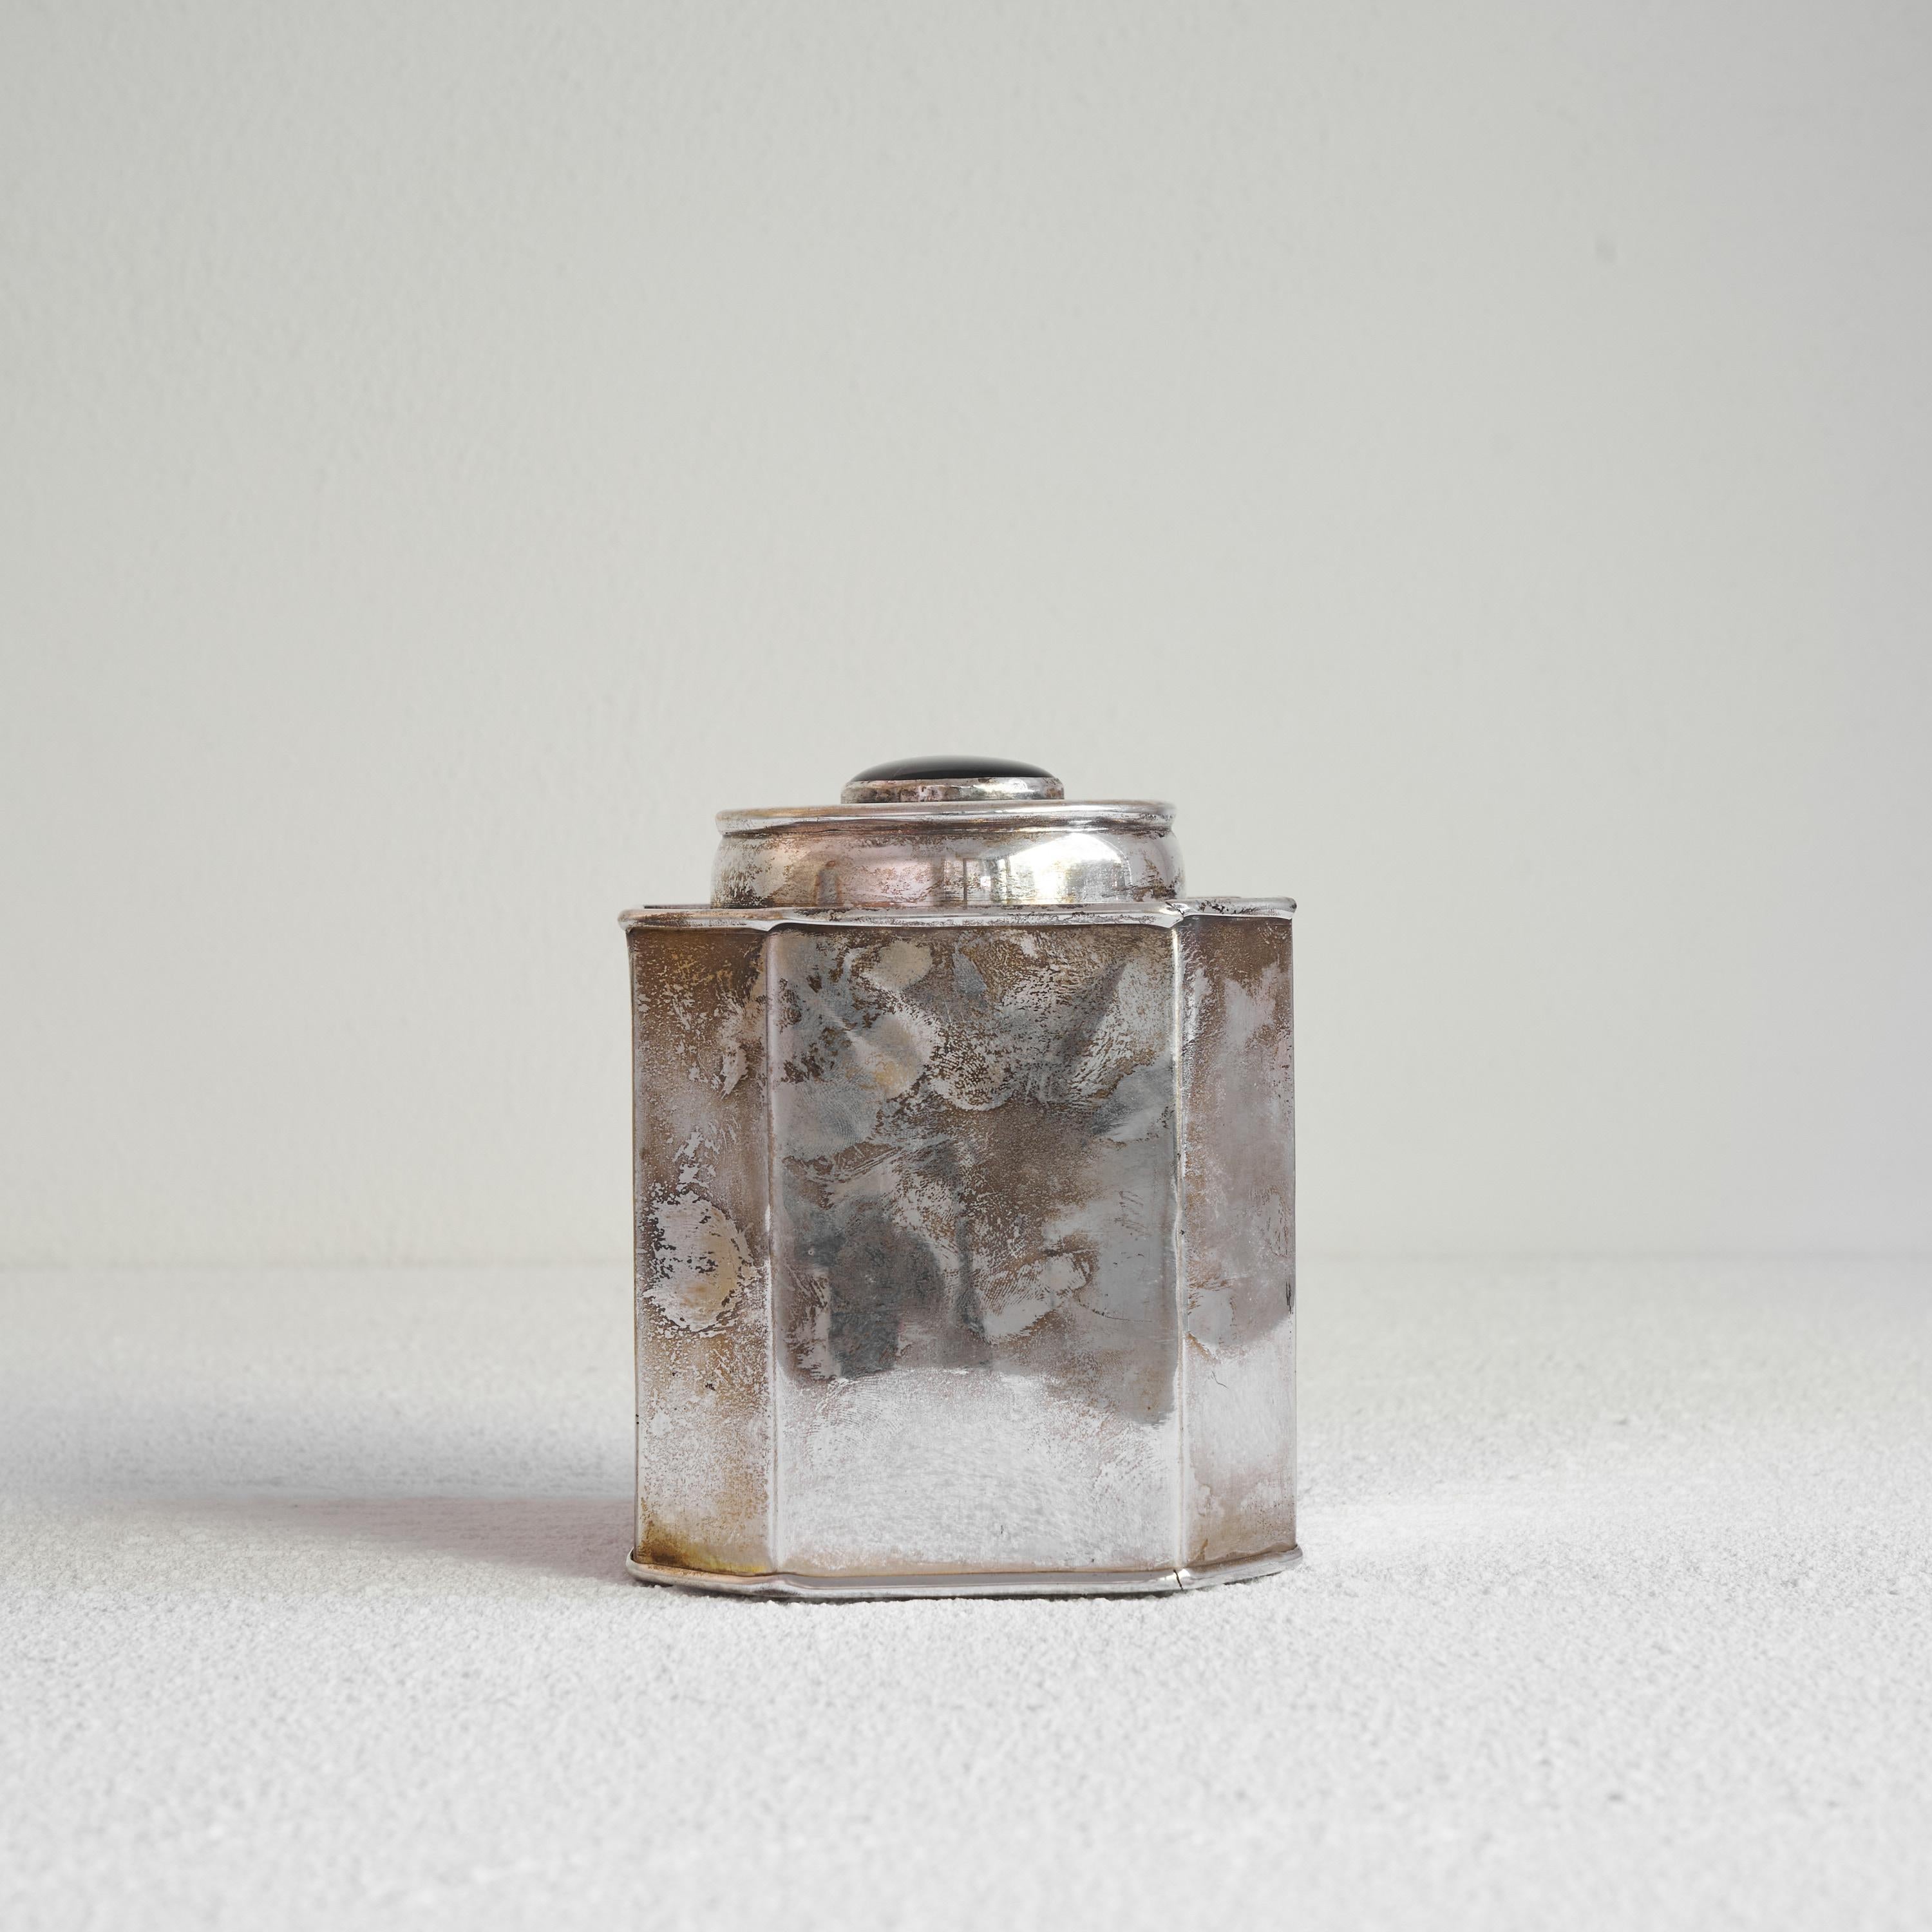 Antique Silver Plated Octagonal Tea Caddy with Lapis Lazuli Colored Detail In Good Condition For Sale In Tilburg, NL